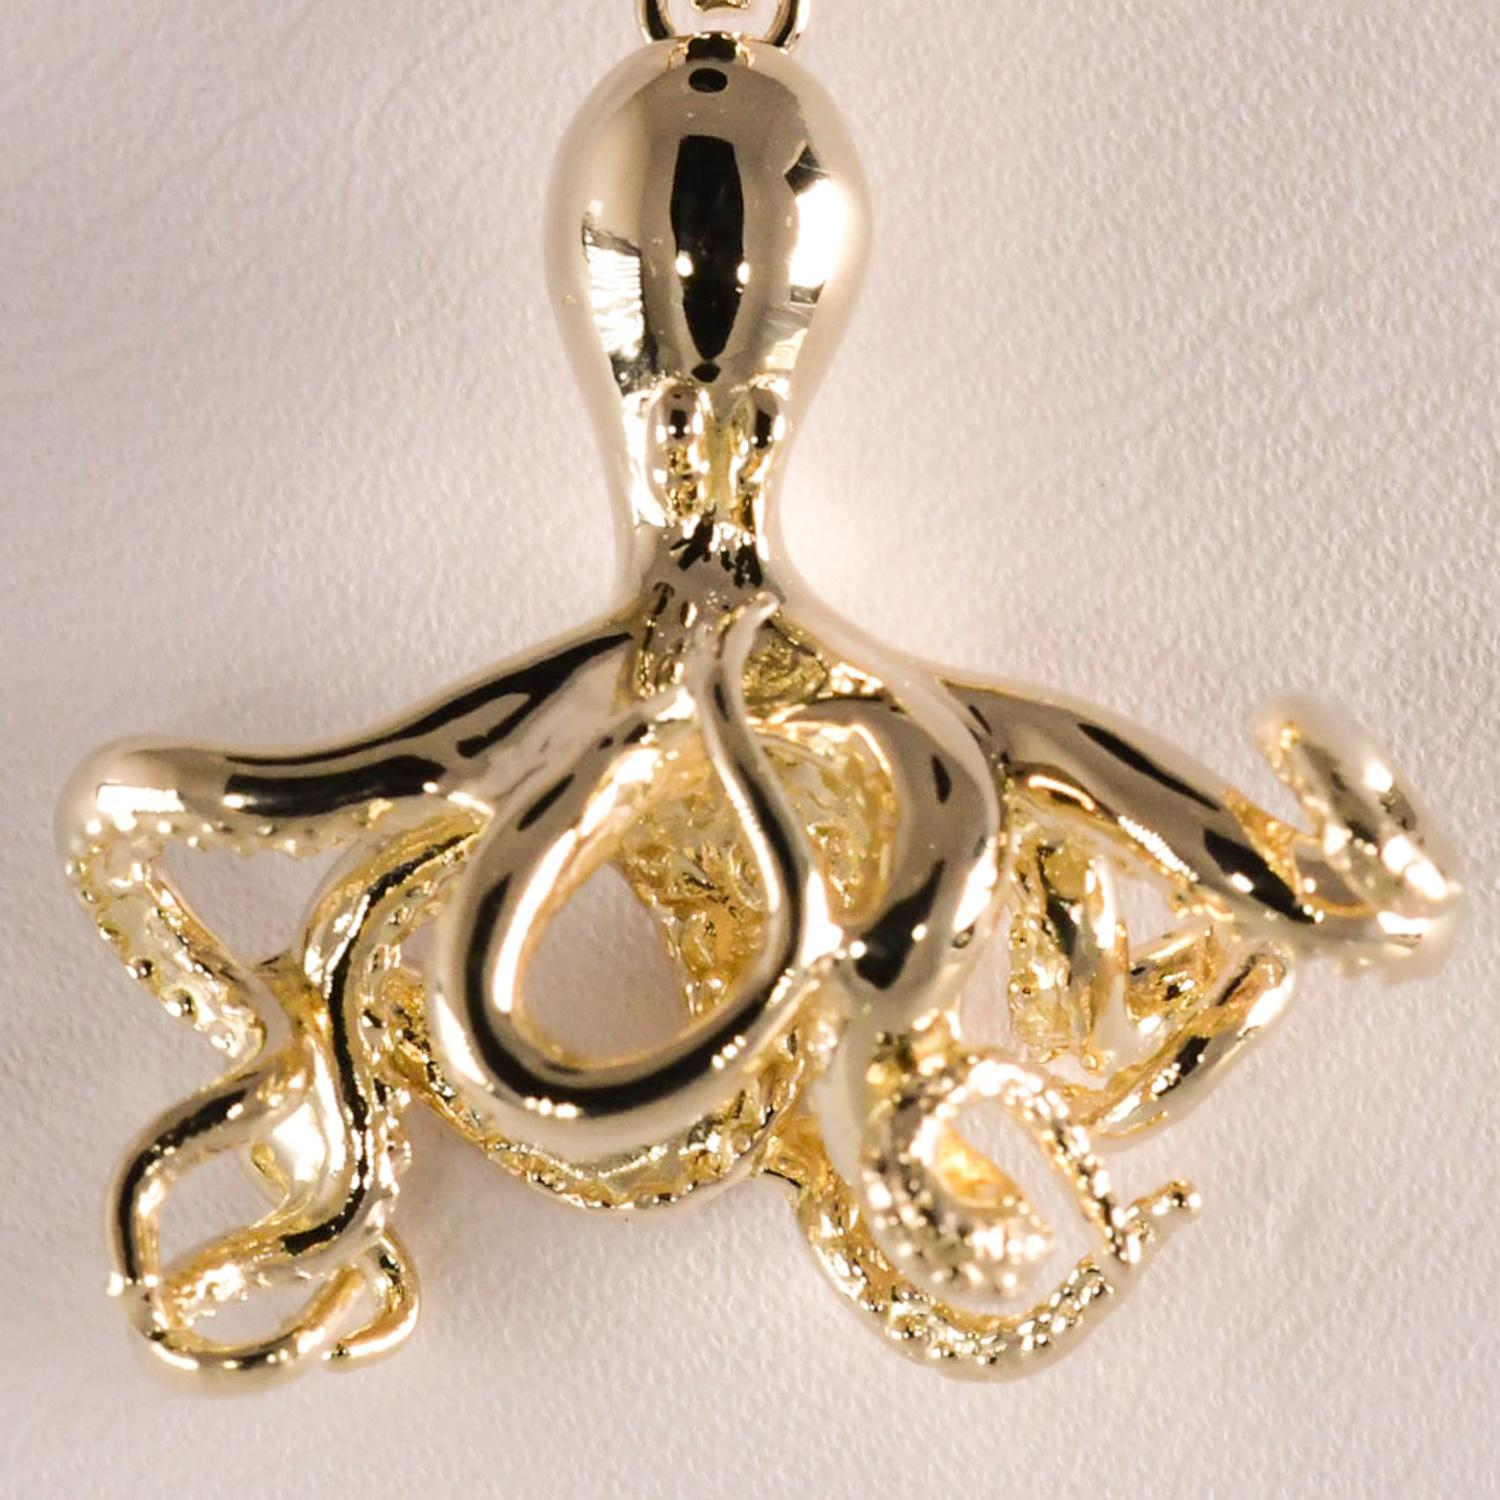 Unique 3 dimensional octopus pendant crafted in 14 karat yellow gold. The pendant measures 1 1/4 inch long (with bail) and 7/8 inch wide. The weight is 7.8 grams. The condition is excellent. (Chain not included). 
